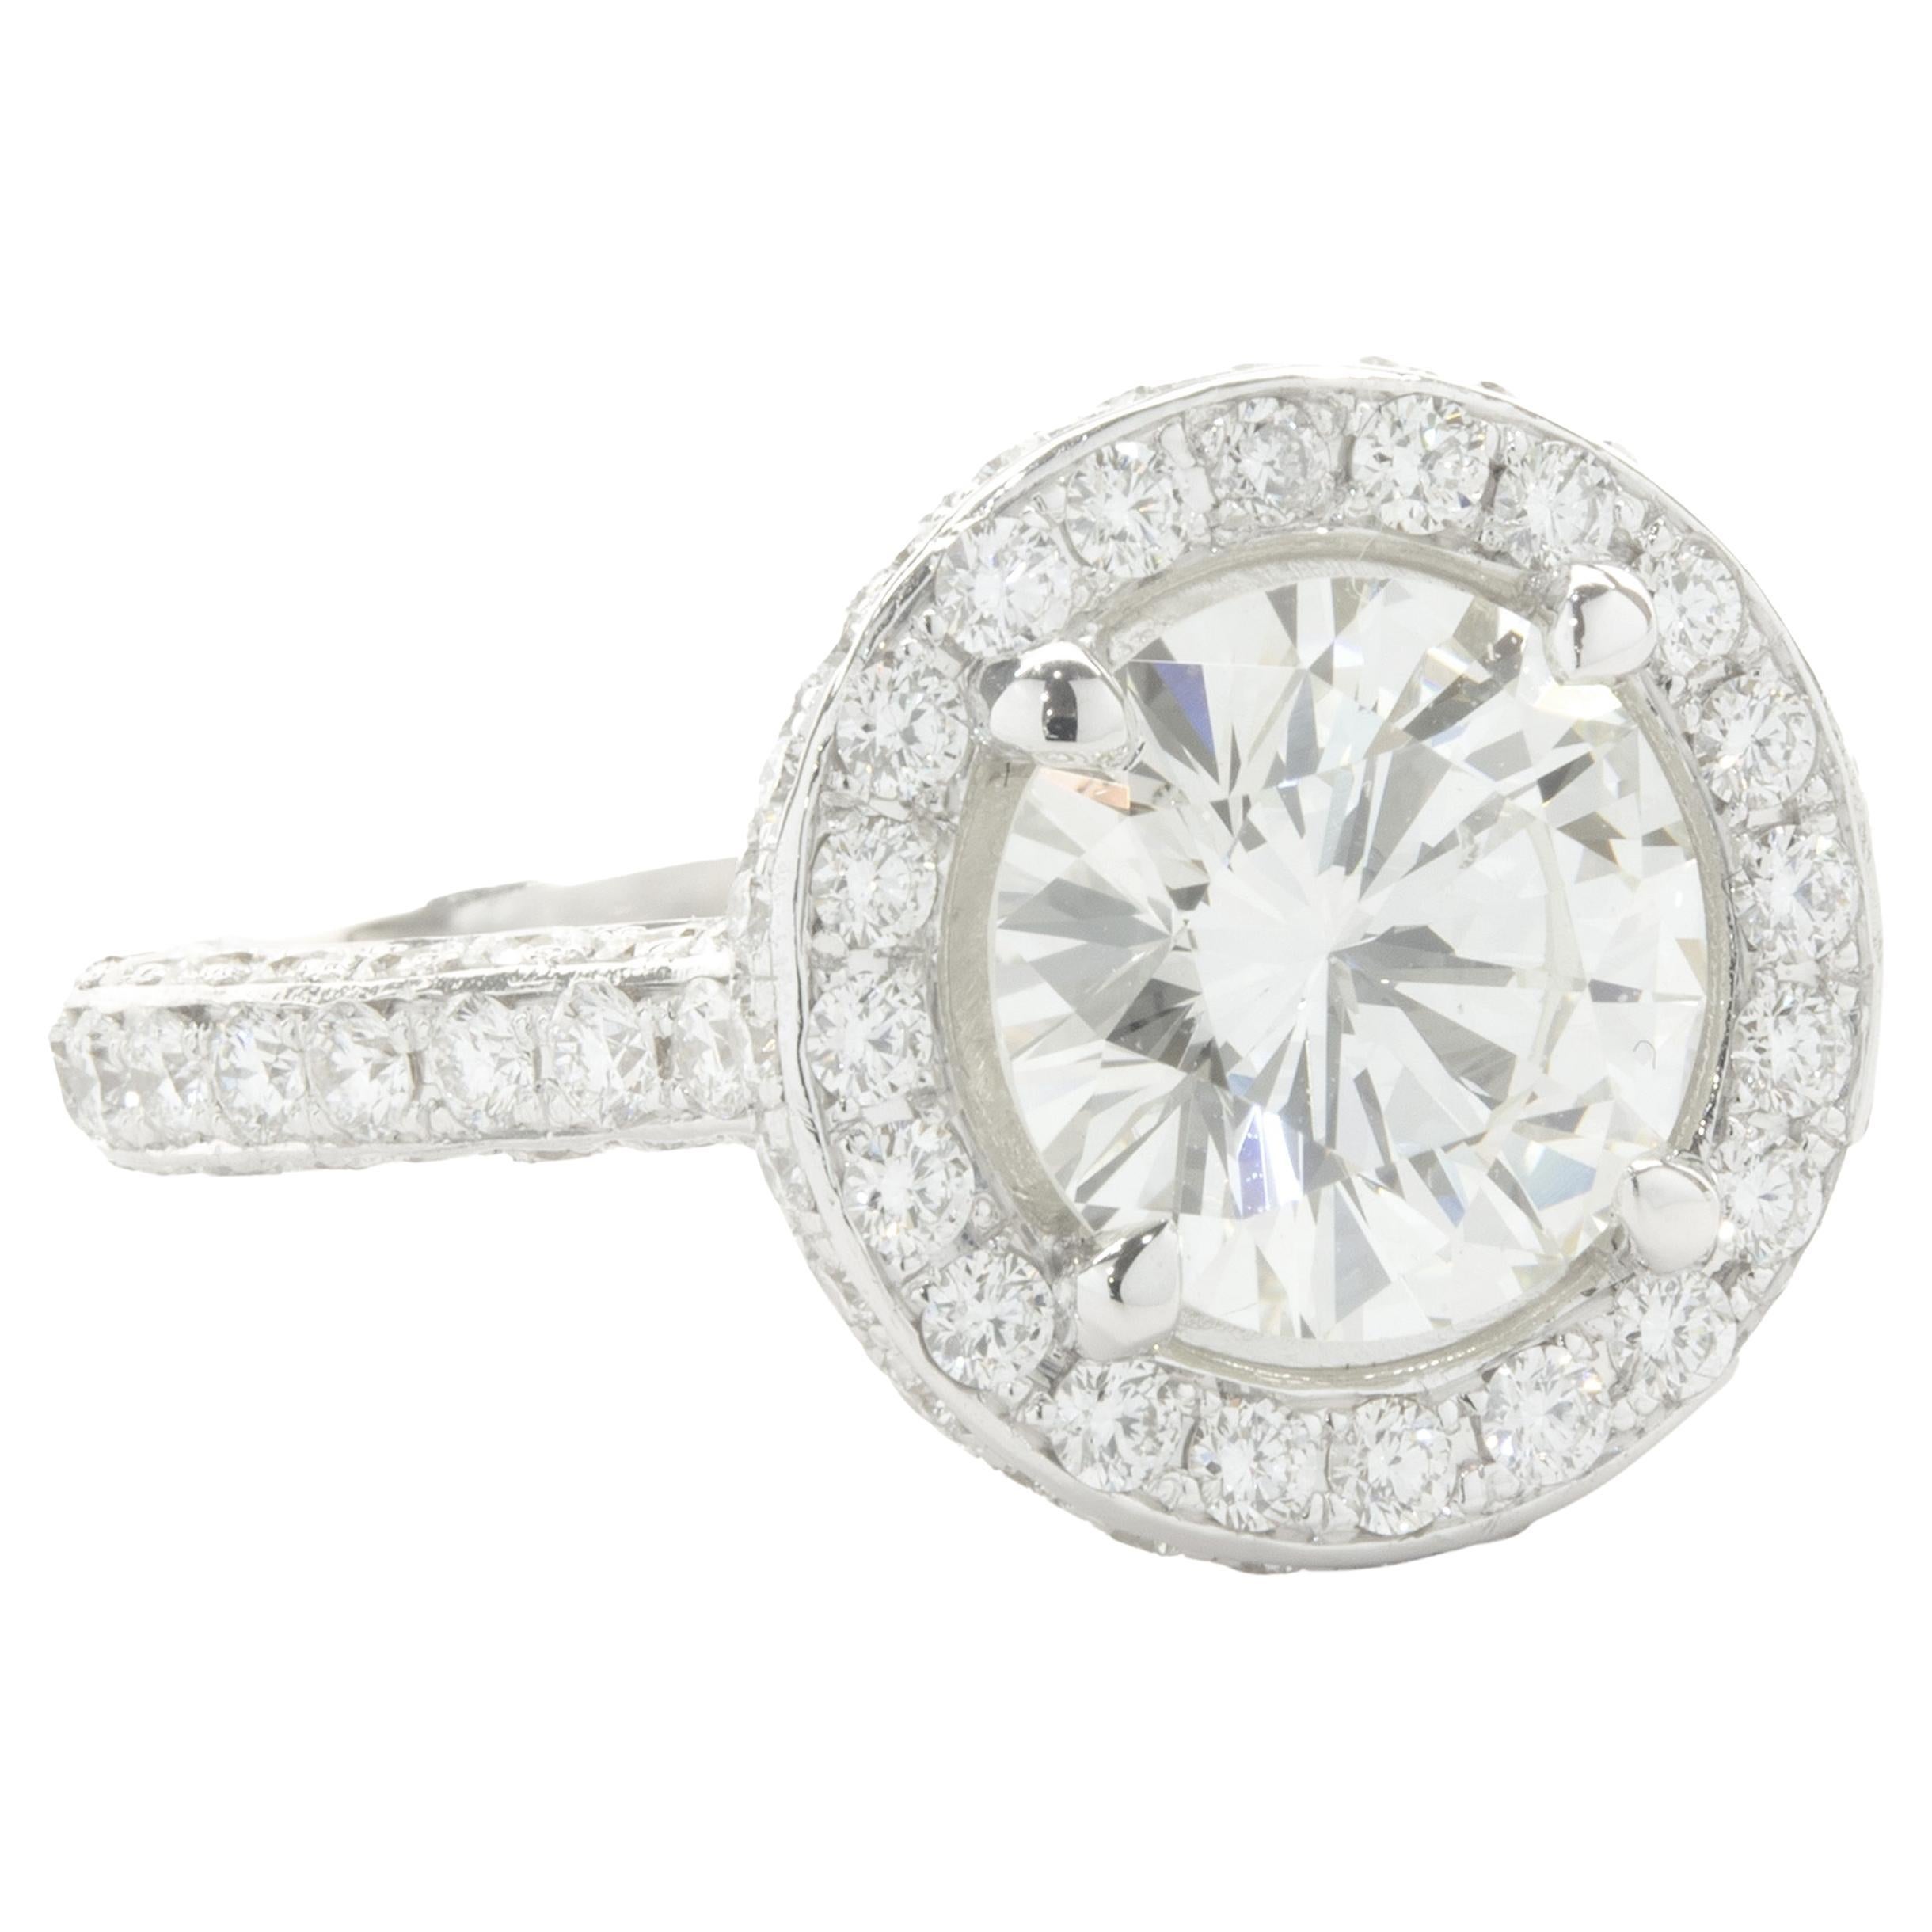 Designer: custom
Material: 14K white gold 
Diamond: 1 round brilliant cut = 2.25ct
Color: J
Clarity: SI2
Diamond: 152 round brilliant = 1.52cttw 
Color: G 
Clarity: VS2
Ring Size: 5 (please allow two additional shipping days for sizing